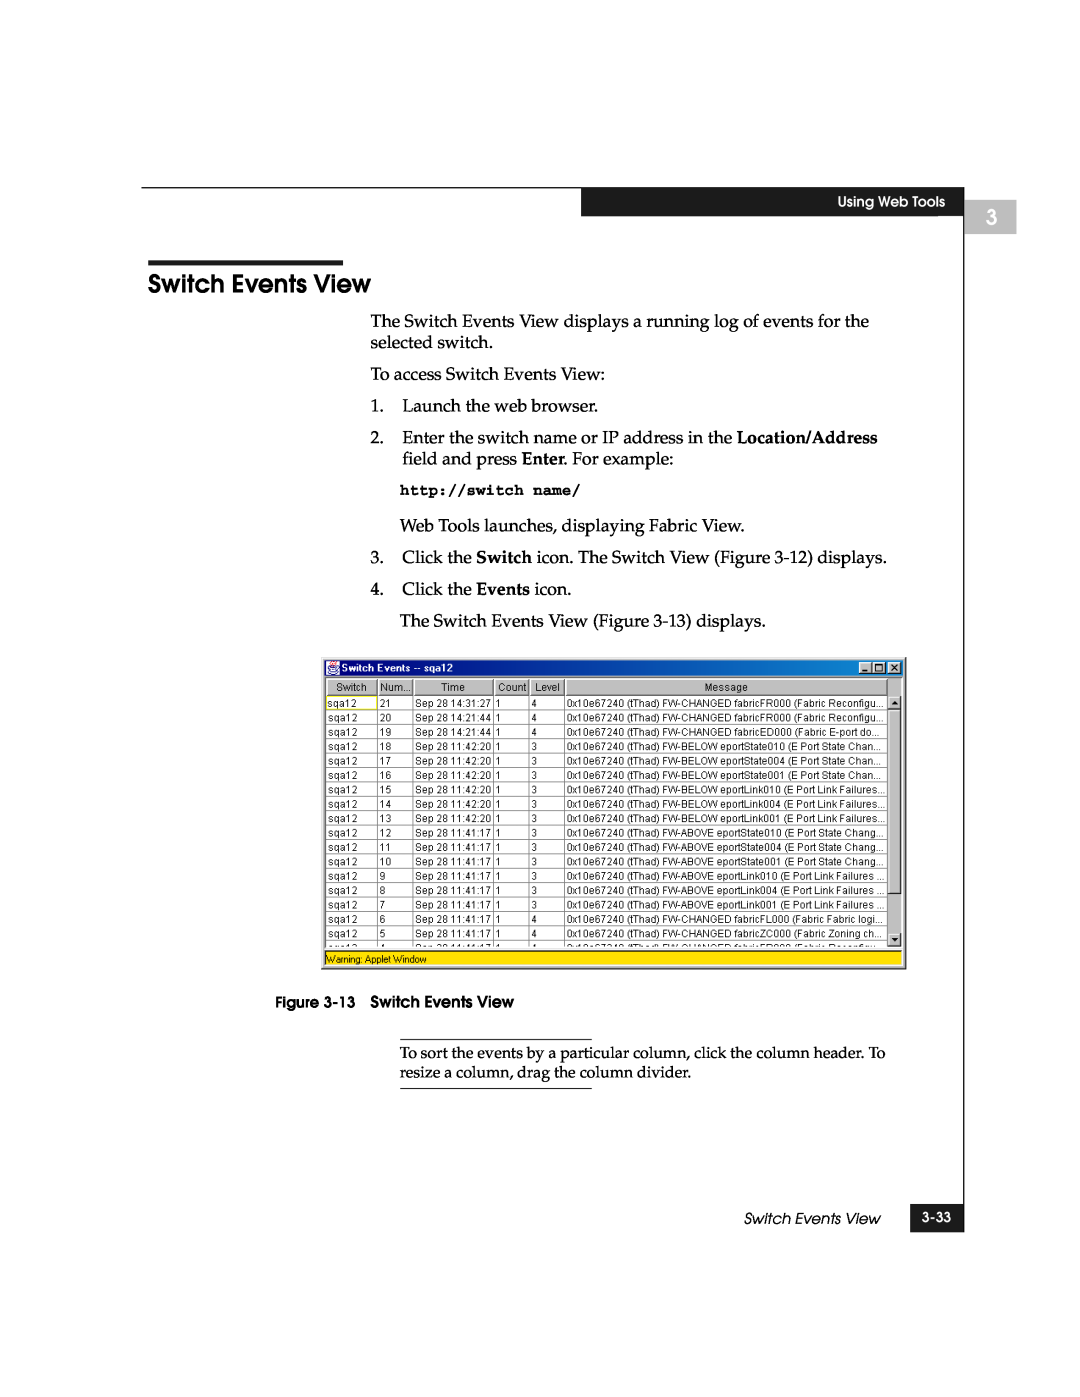 EMC DS-8B manual 13 Switch Events View 